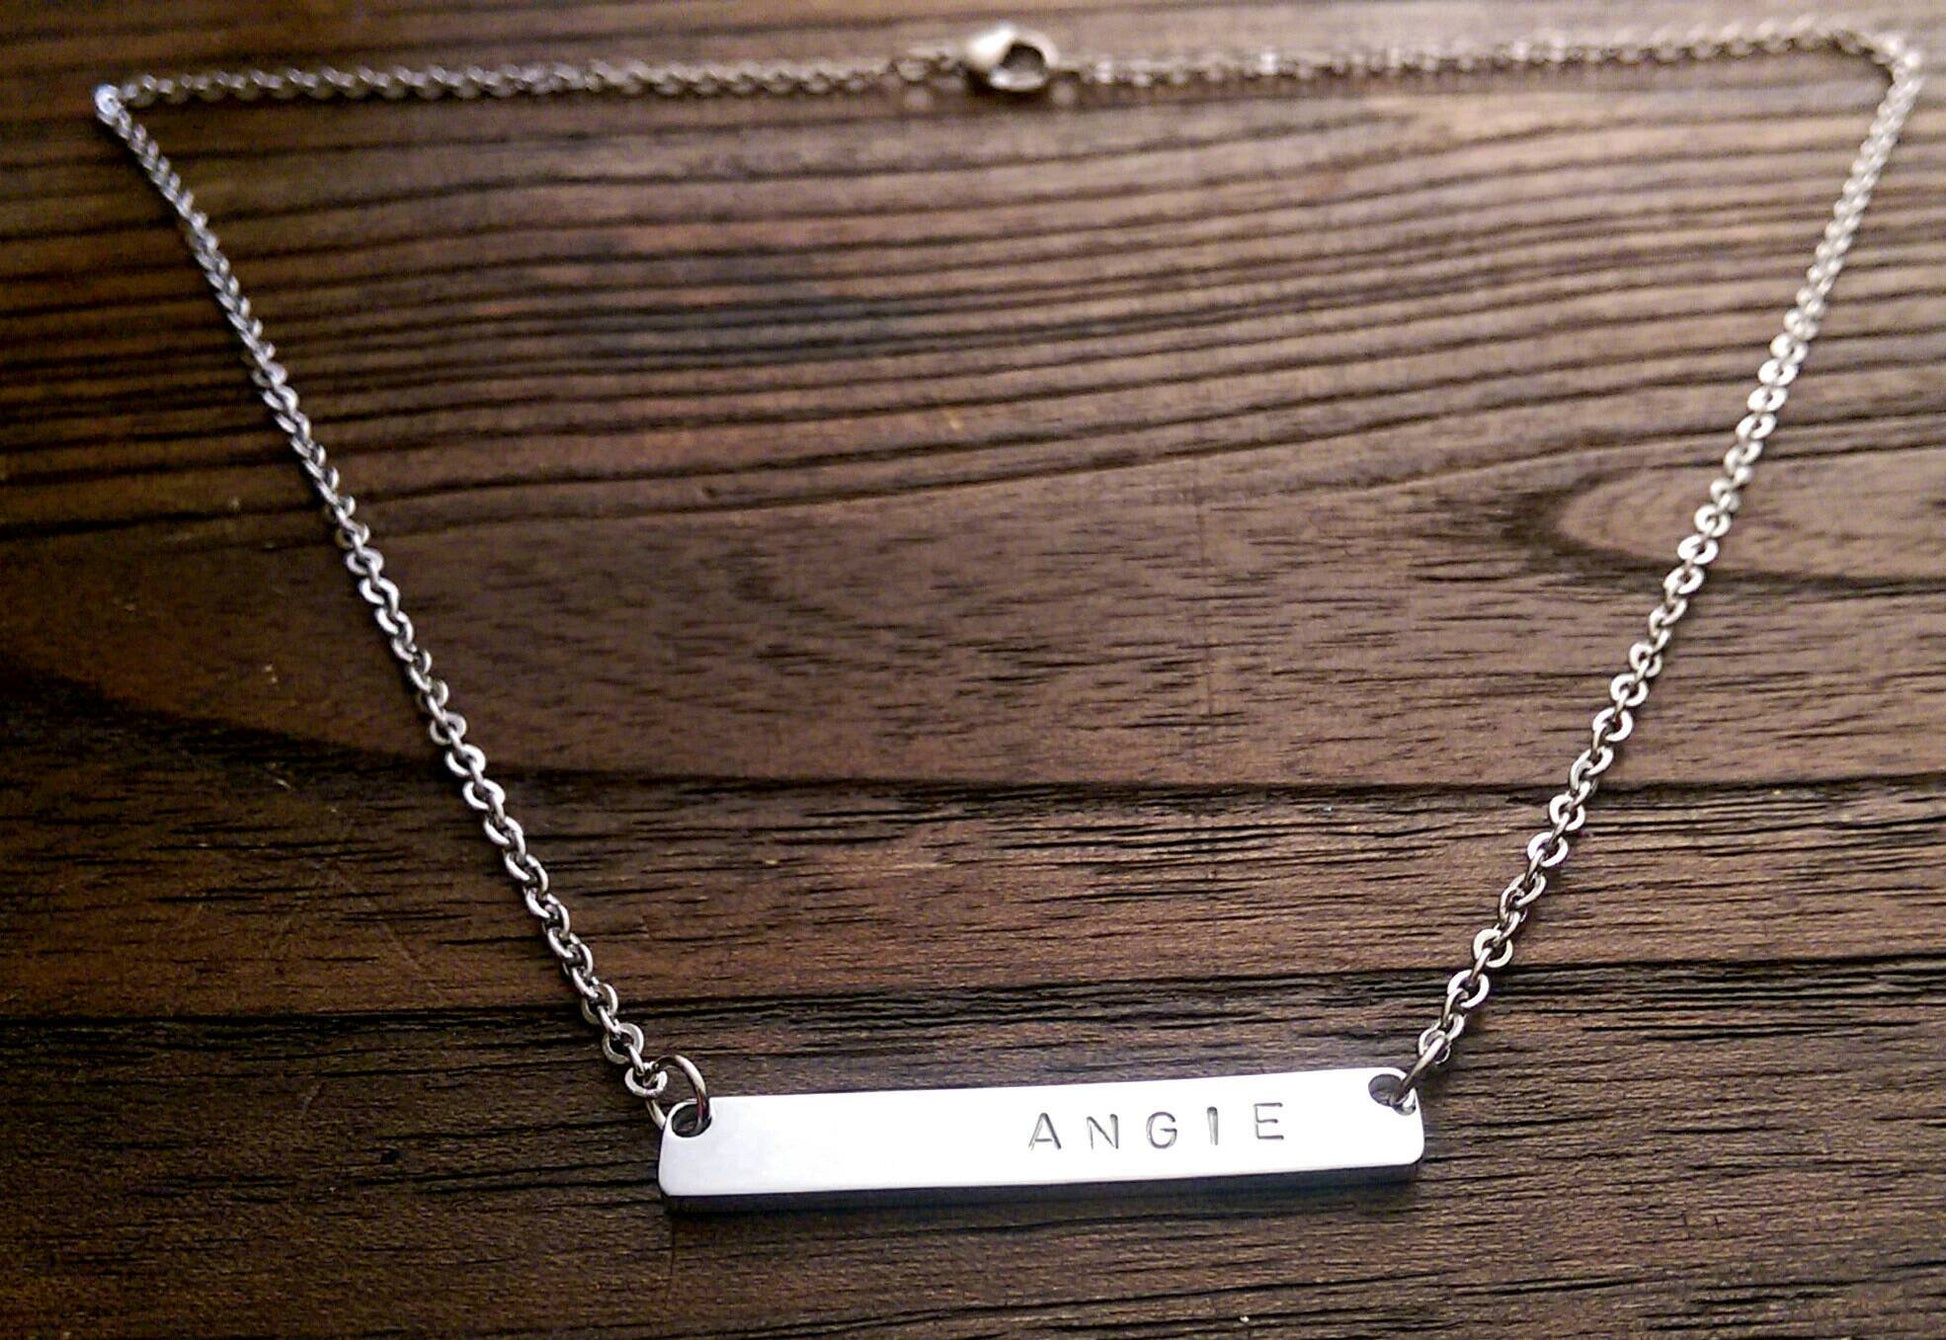 Personalised Name Bar Necklace Curved Bar Stainless Steel. - Silver and Resin Designs